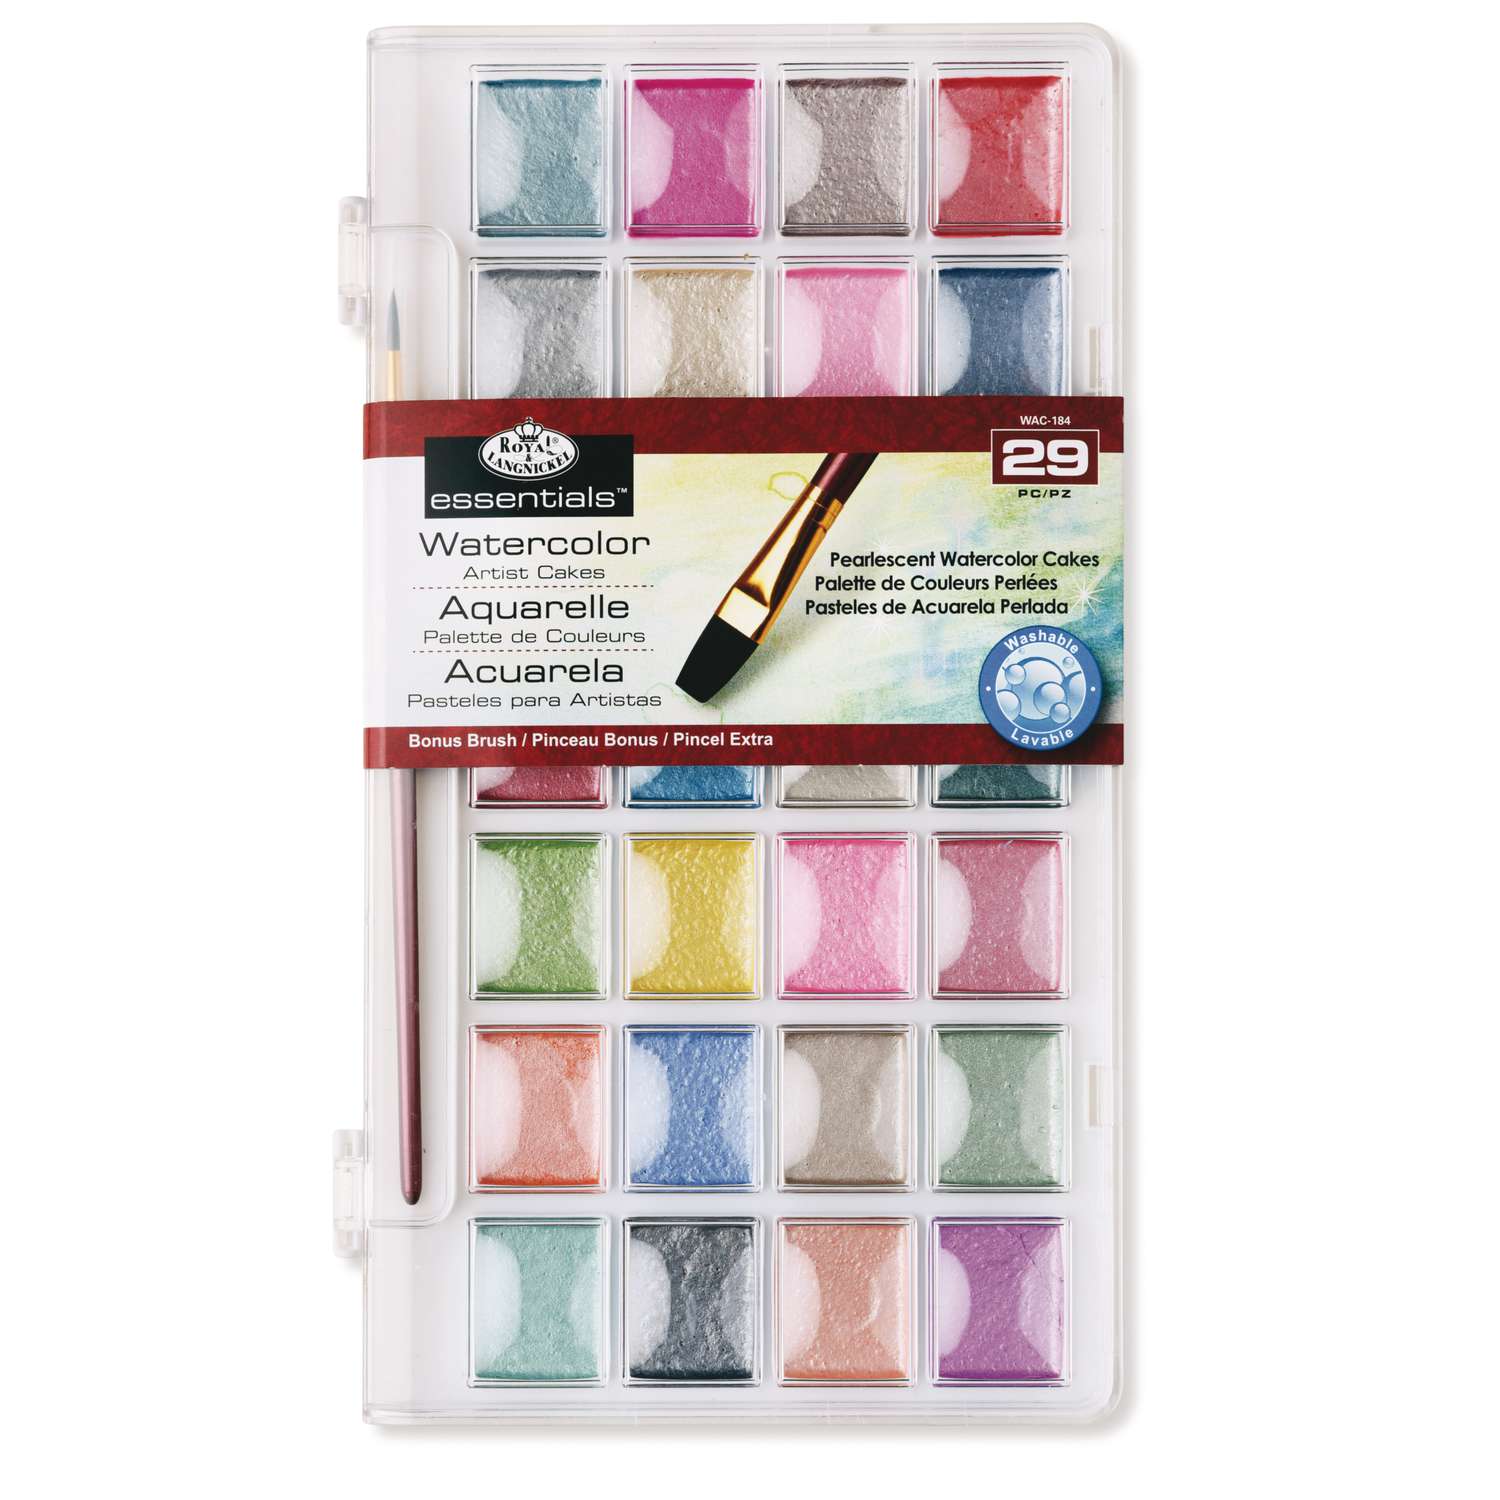 Royal & Langnickel Watercolor Pearlescent Cakes 29pc